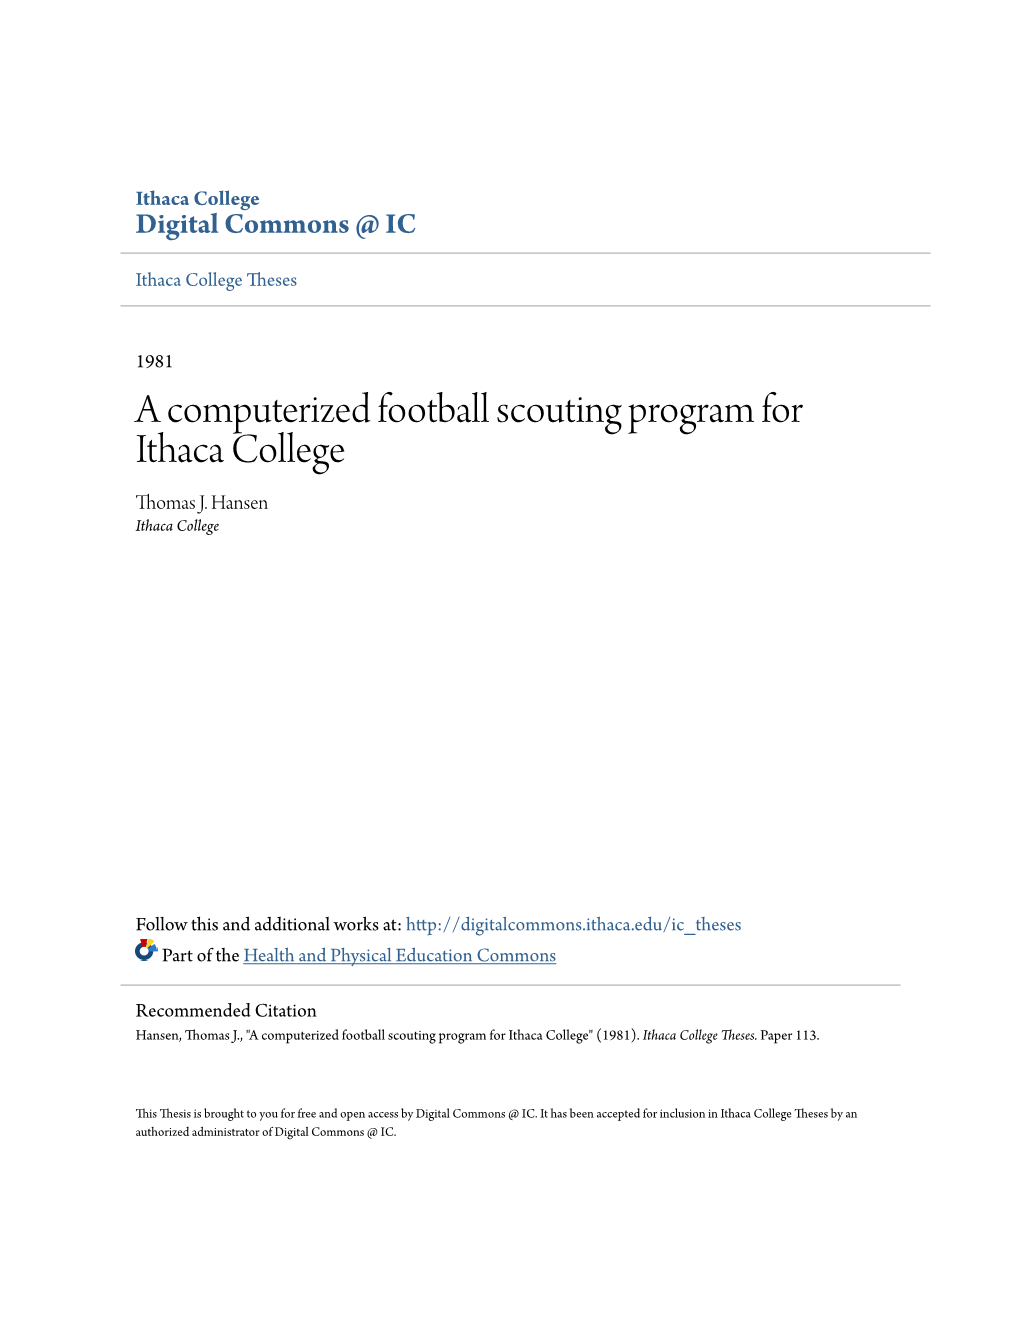 A Computerized Football Scouting Program for Ithaca College Thomas J